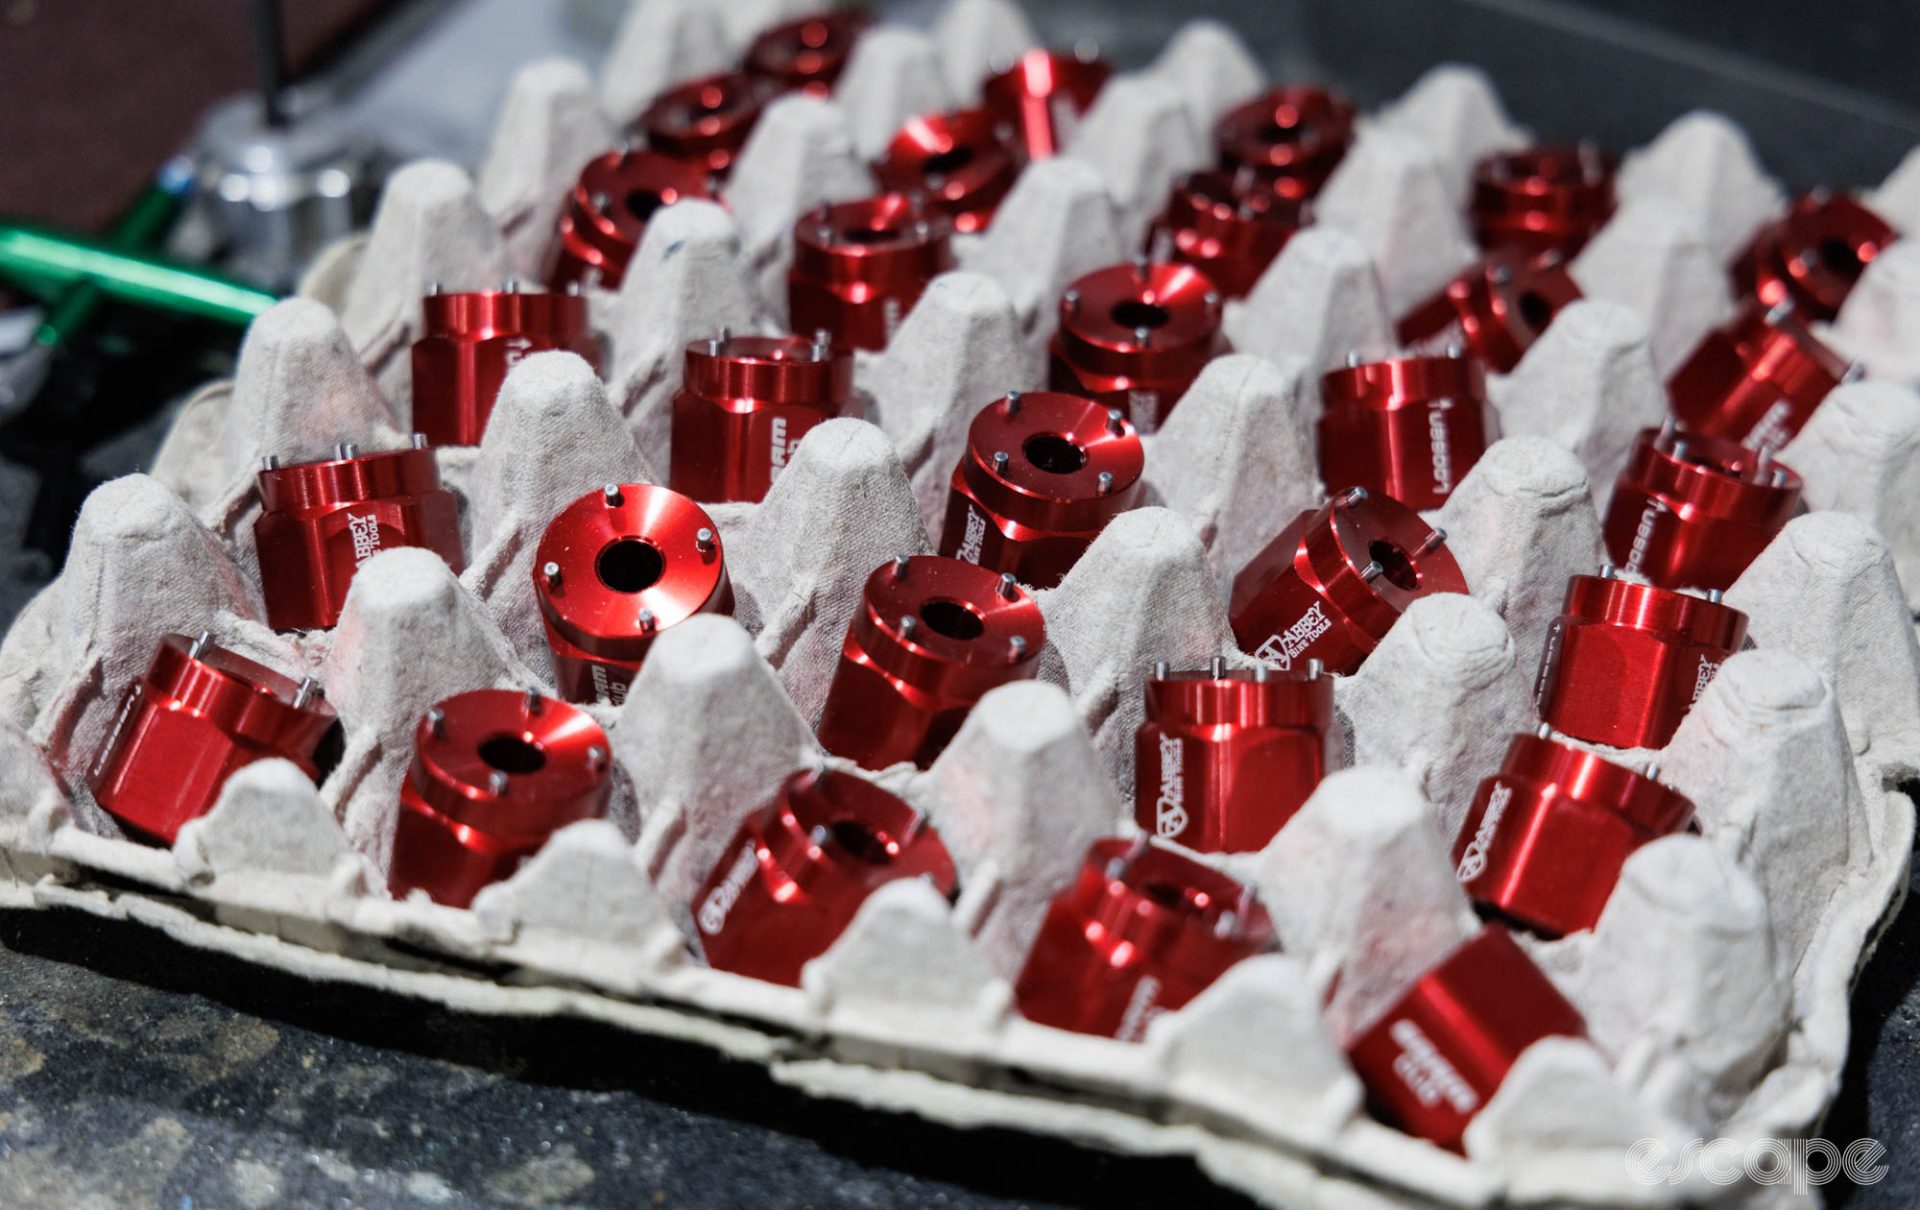 A tray of red-anodised DUB crank cap tools with the Abbey logo.